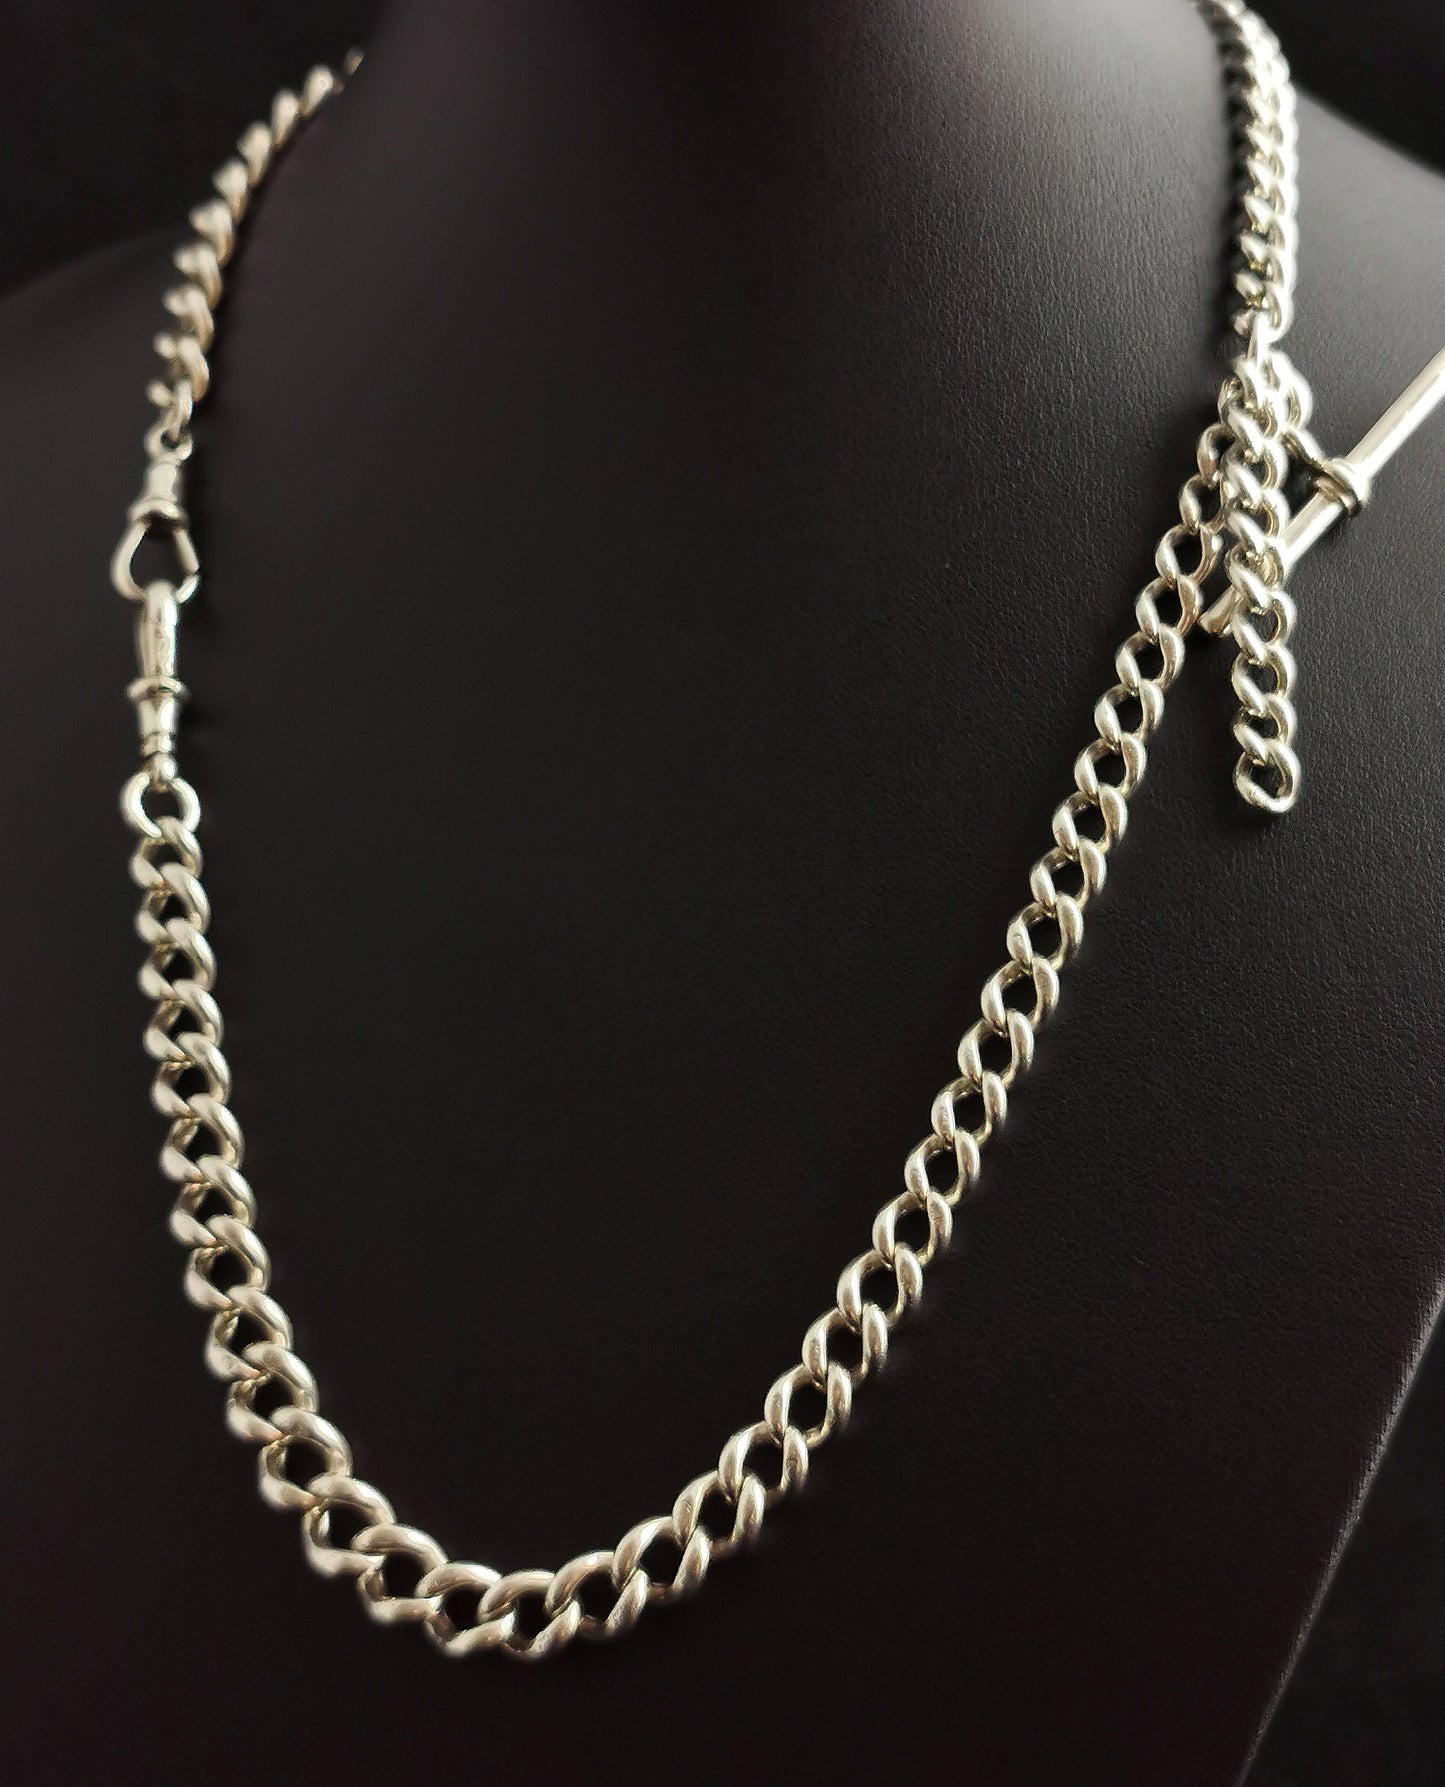 Antique silver Double Albert chain, watch chain necklace, heavy